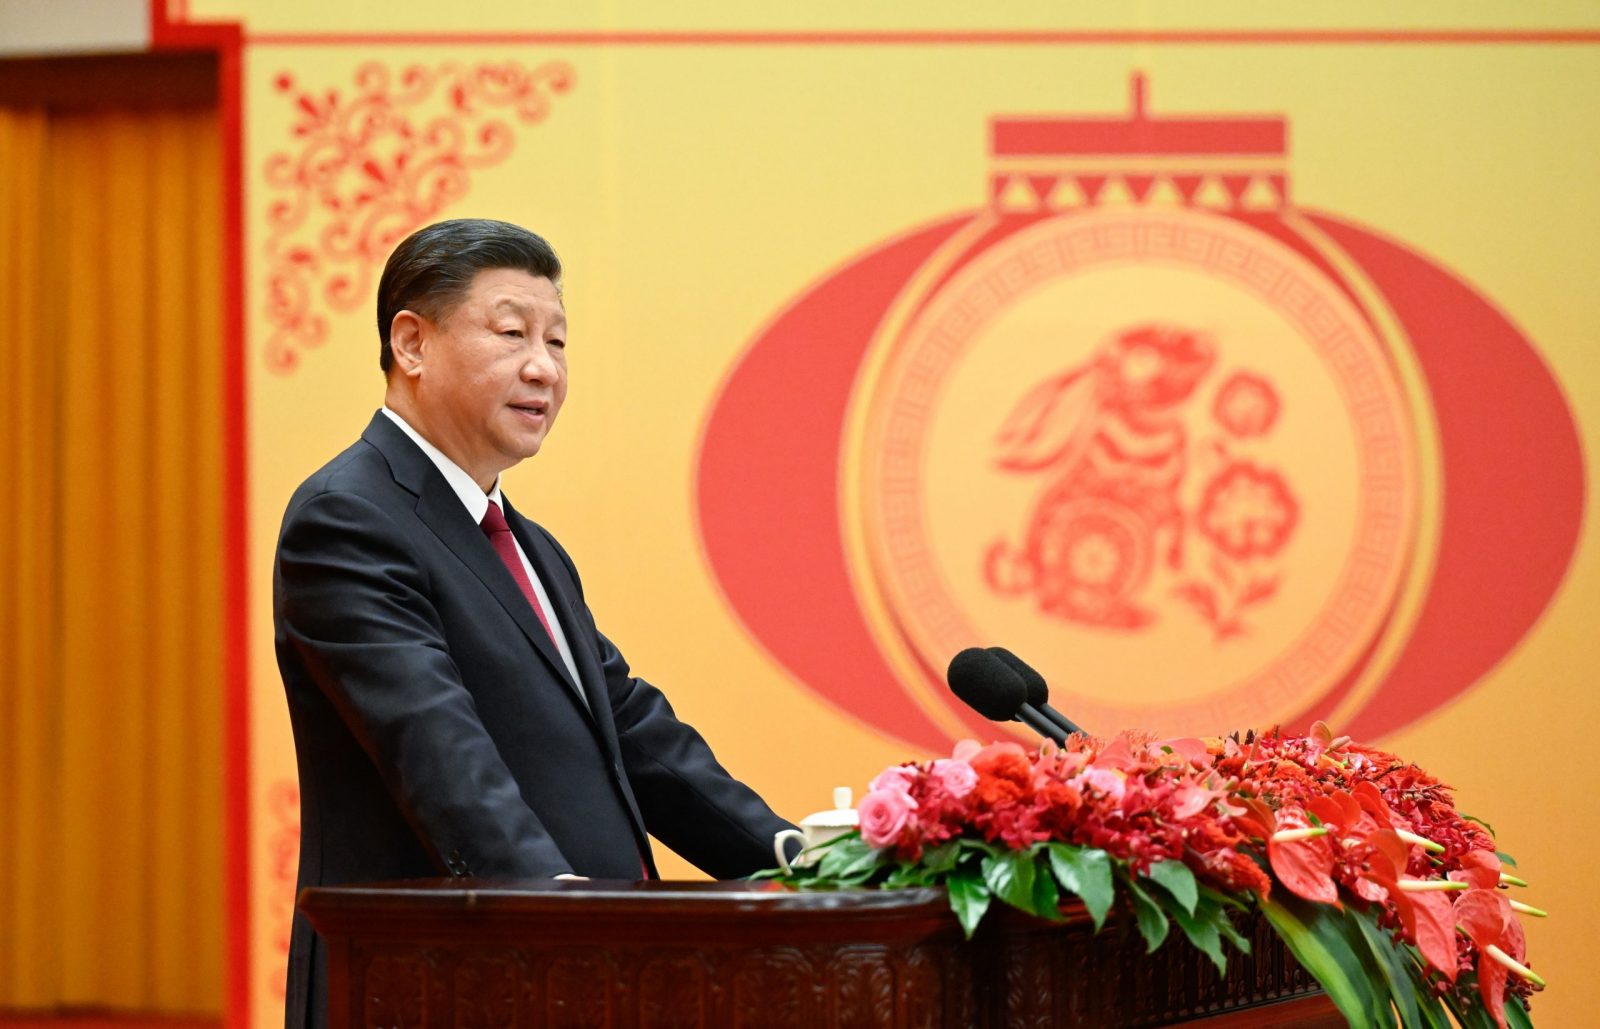 epa10419696 Chinese President Xi Jinping, general secretary of the Communist Party of China (CPC) Central Committee and chairman of the Central Military Commission, delivers a speech at a Spring Festival reception at the Great Hall of the People in Beijing, China, 20 January 2023 (Issued 21 January). The Communist Party of China (CPC) Central Committee and the State Council held the reception on 20 January in Beijing. his year's Spring Festival, or the Chinese Lunar New Year, falls on January 22.  EPA/XINHUA / Li Xueren CHINA OUT / MANDATORY CREDIT  EDITORIAL USE ONLY